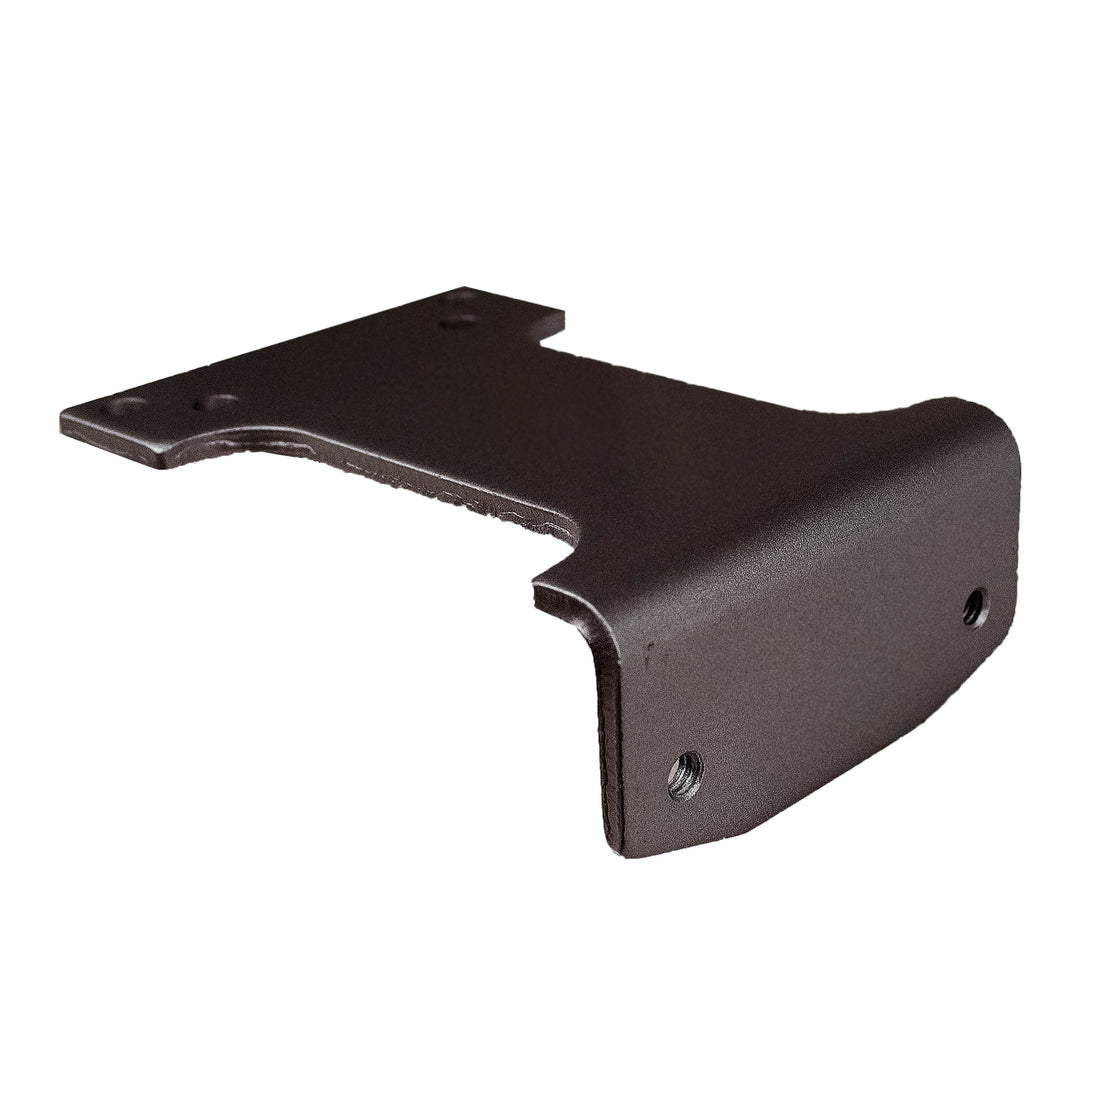 Parallel Arm Bracket for 4300 Series -  Pro-Edge HD